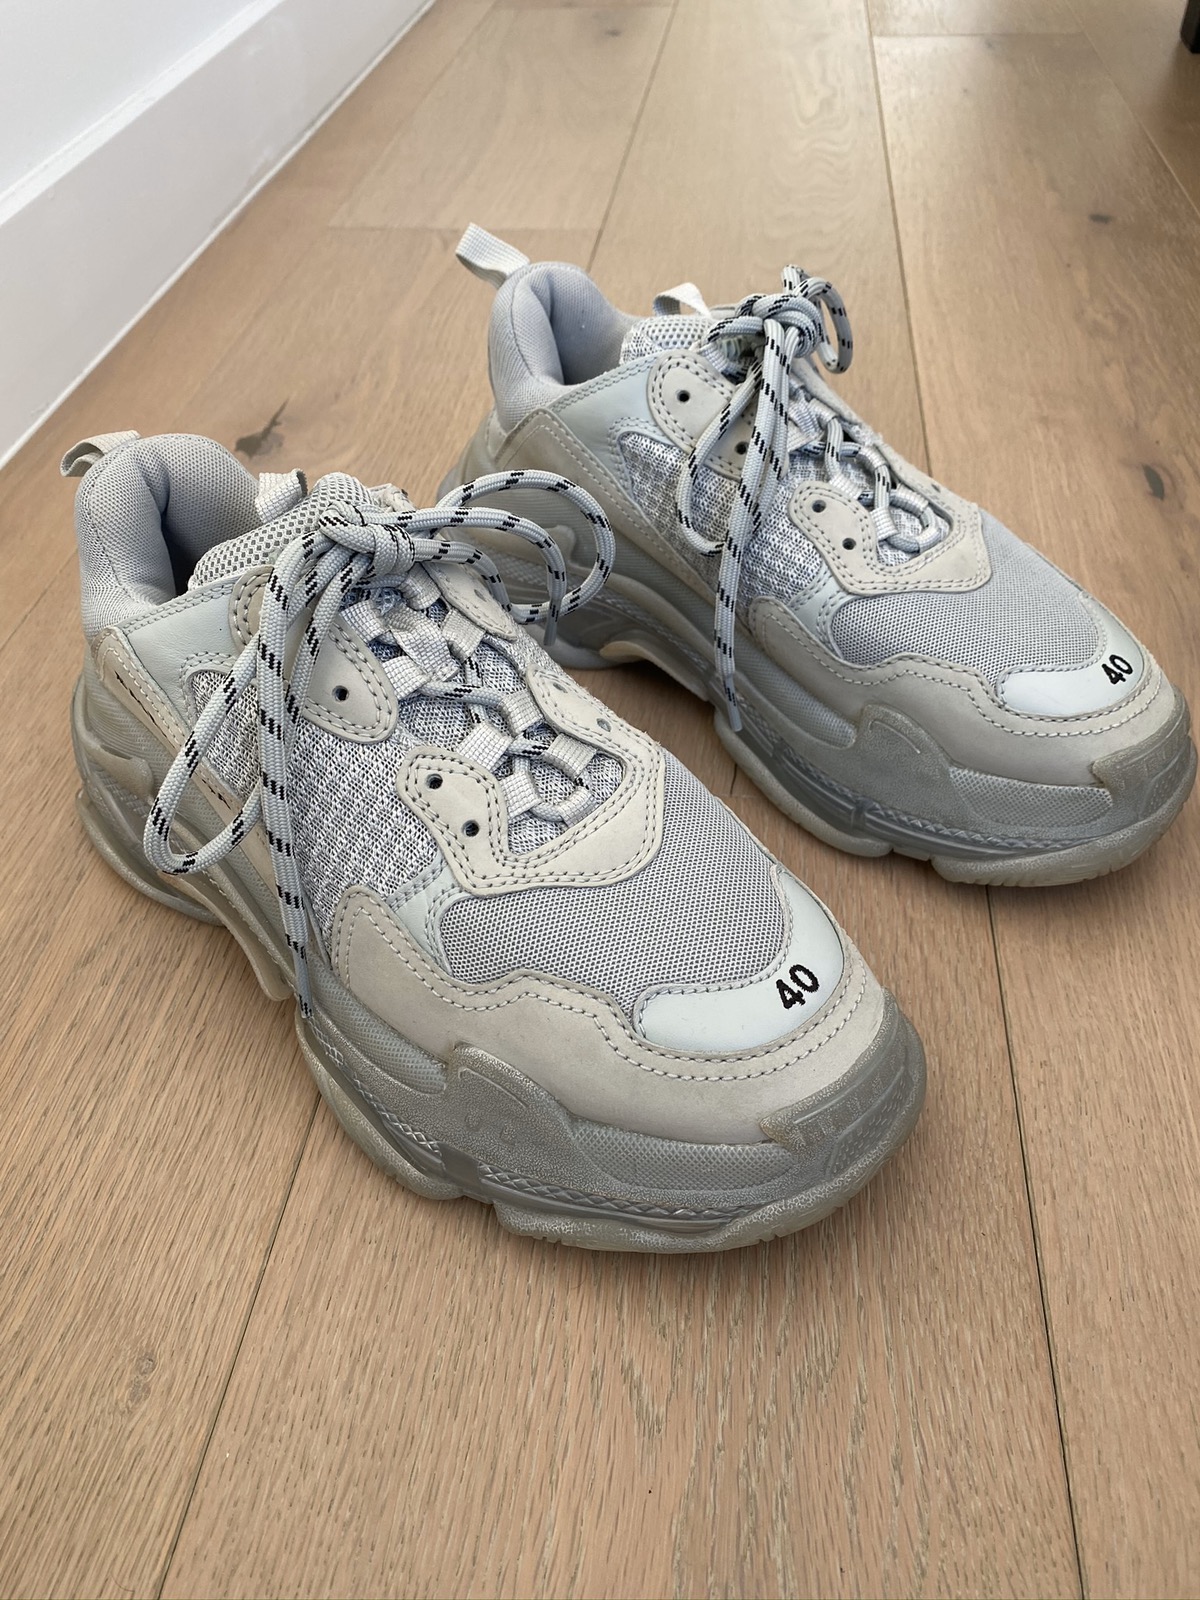 Balenciaga Triple S Sneaker Clear Sole Grey for sale - Perfect Shoes